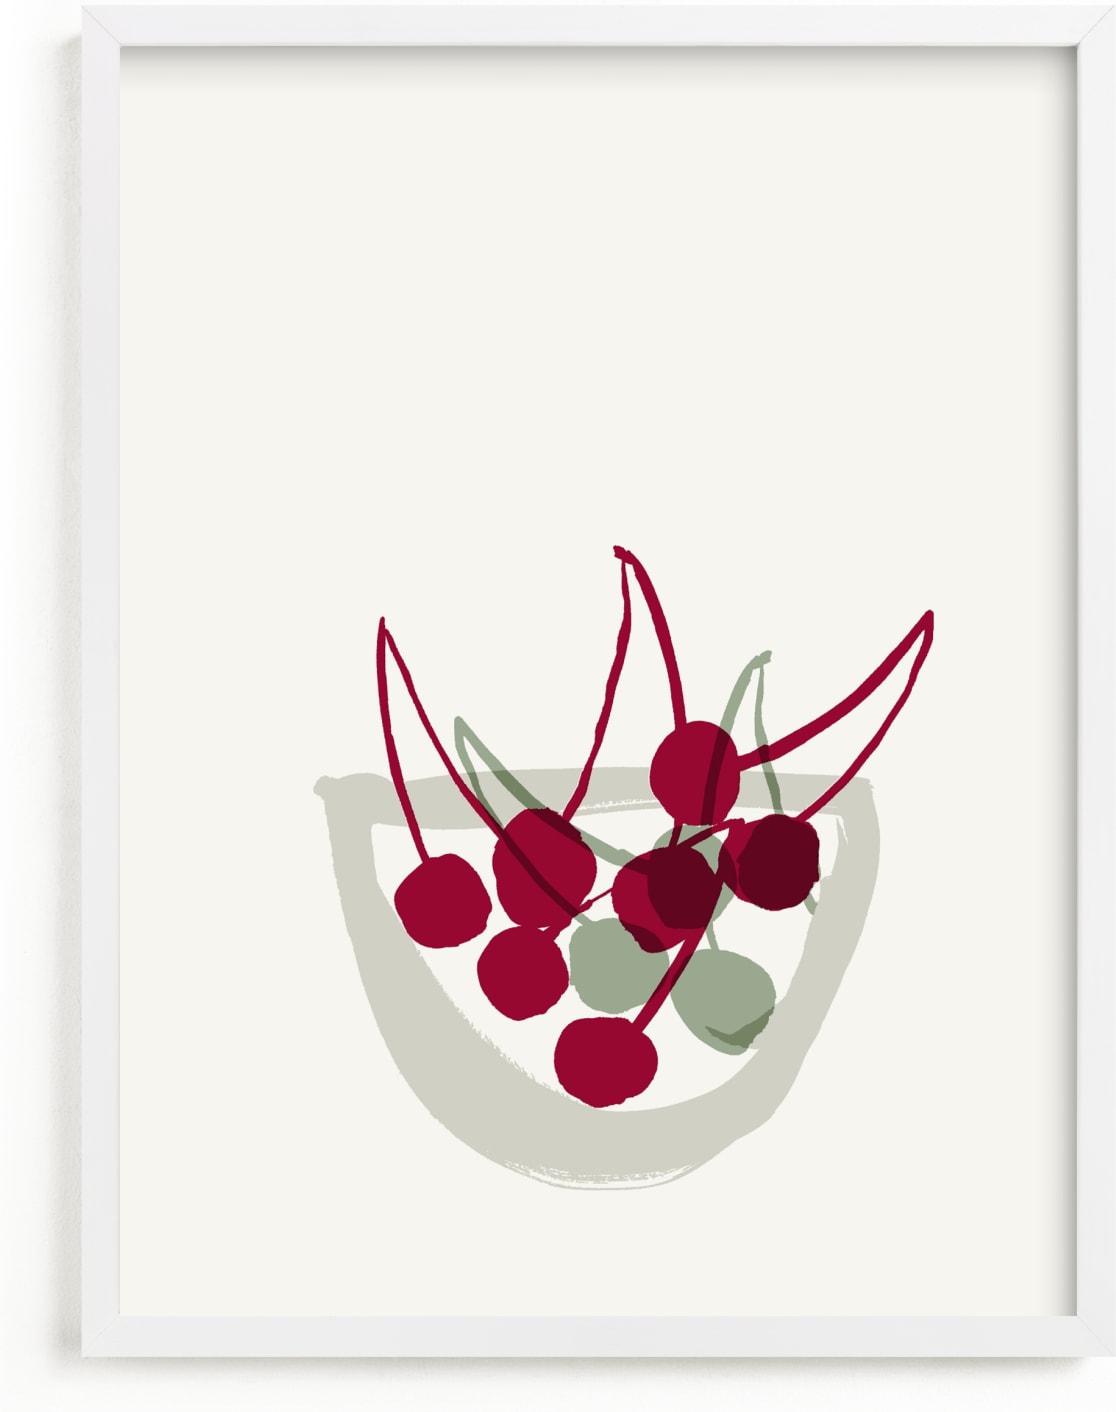 This is a grey art by Sonya Percival called Life is a bowl of cherries.